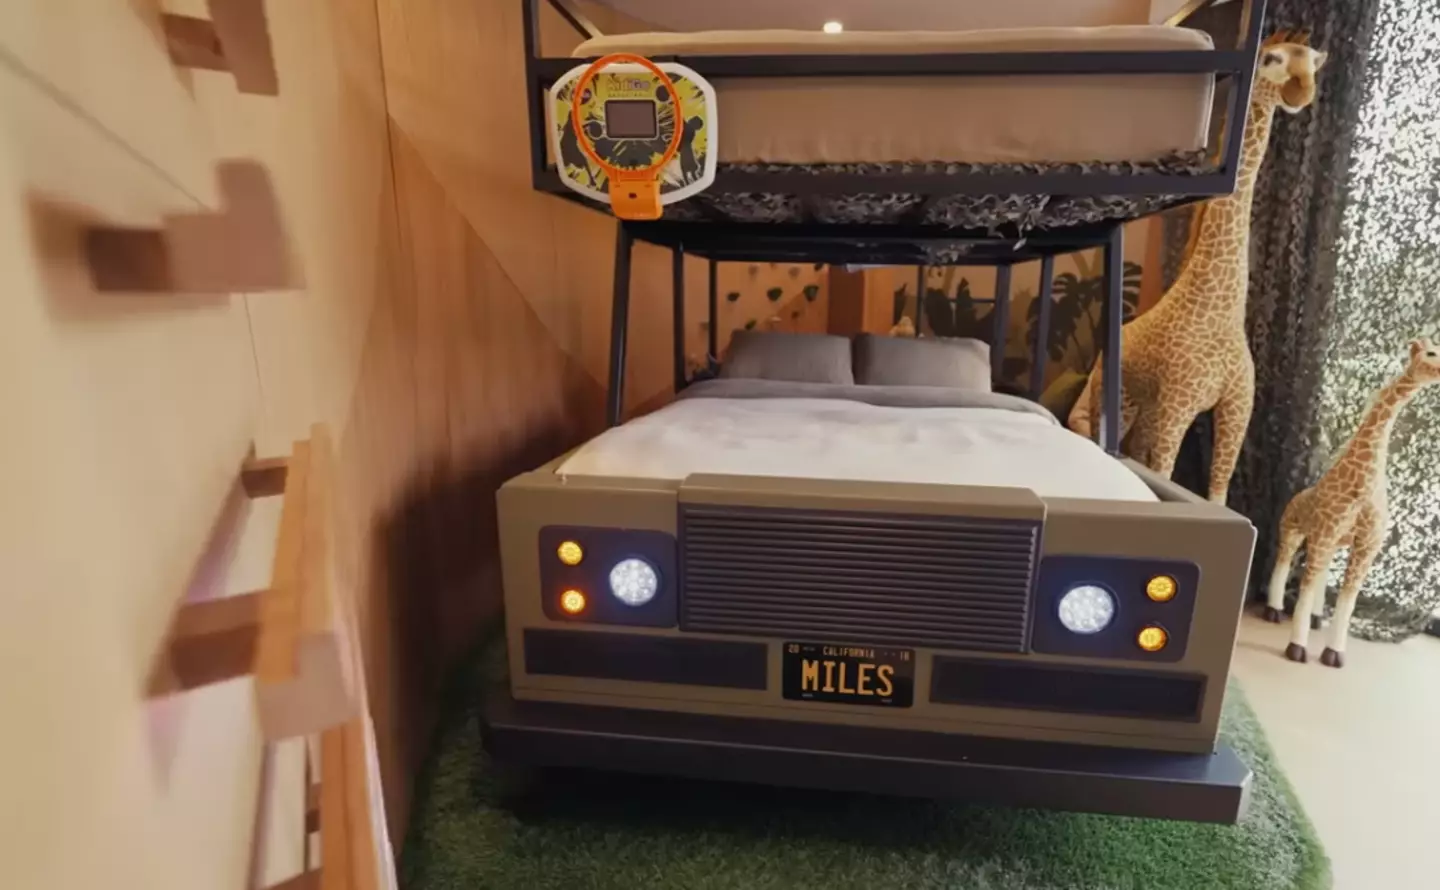 Miles has his own Jeep-designed bed with personalised plates.